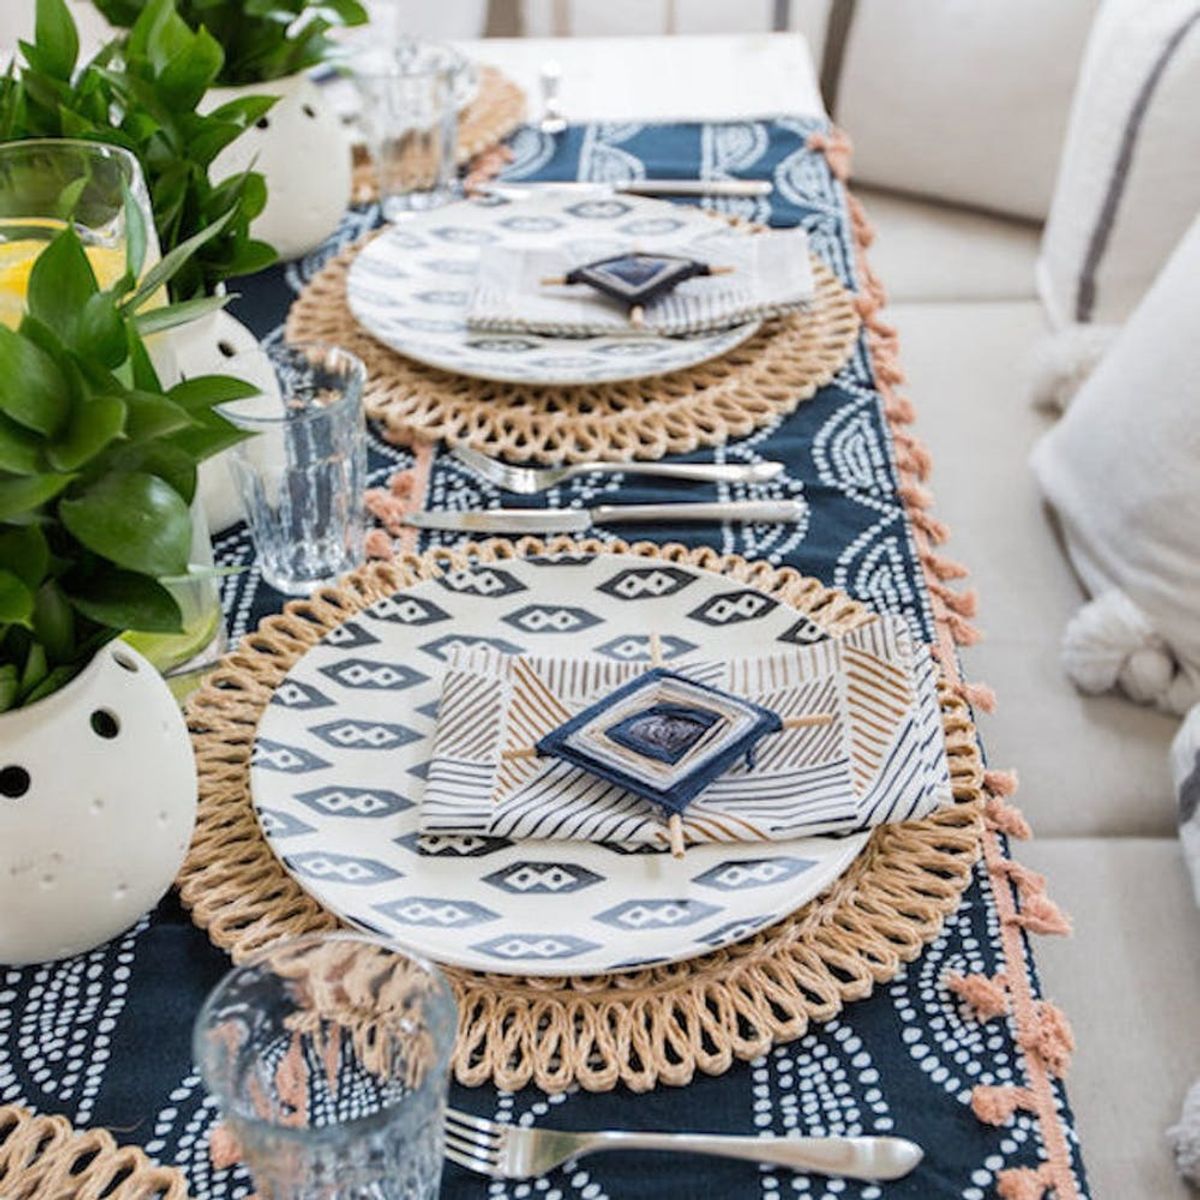 Nate Berkus’ Latest Target Collection Was MADE for Father’s Day